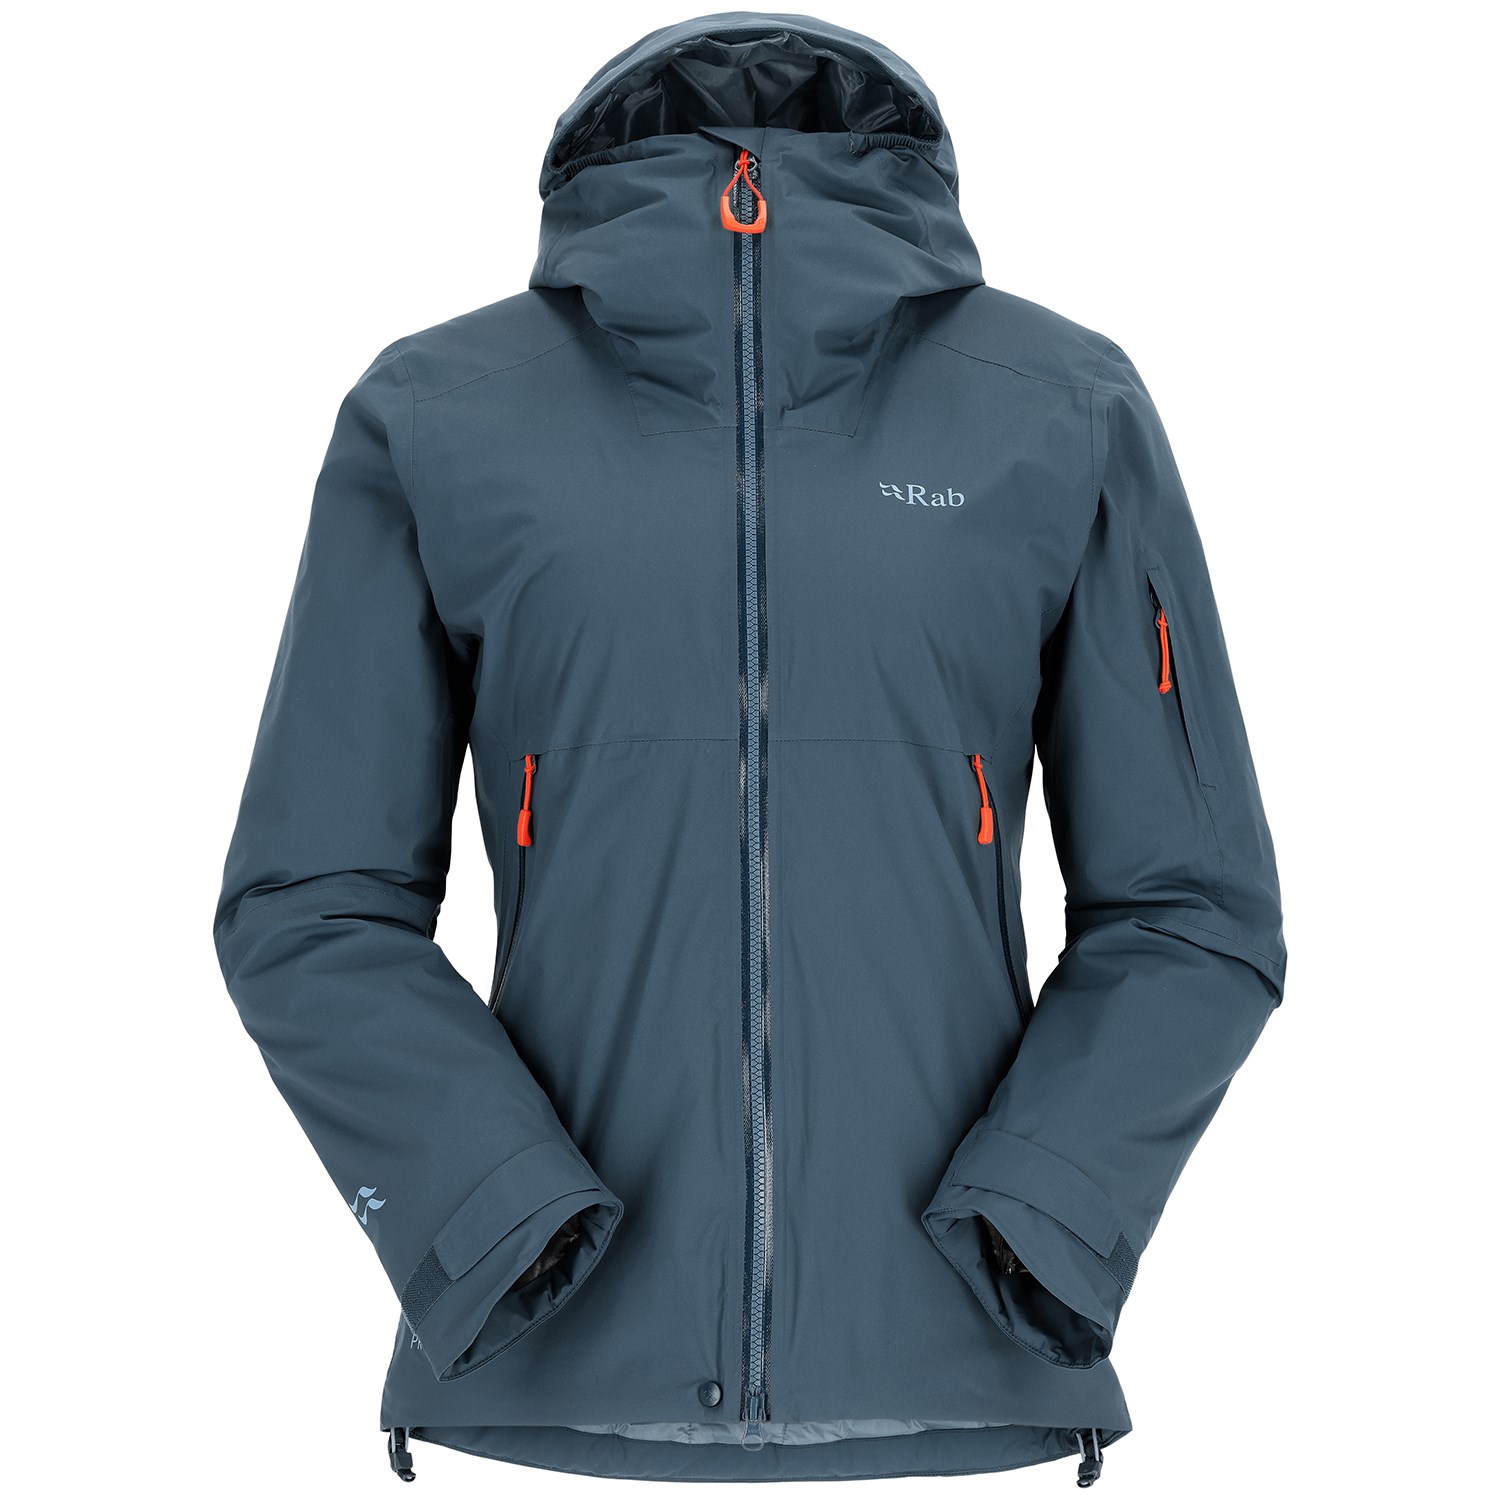 Men's Khroma Transpose Insulated Jacket